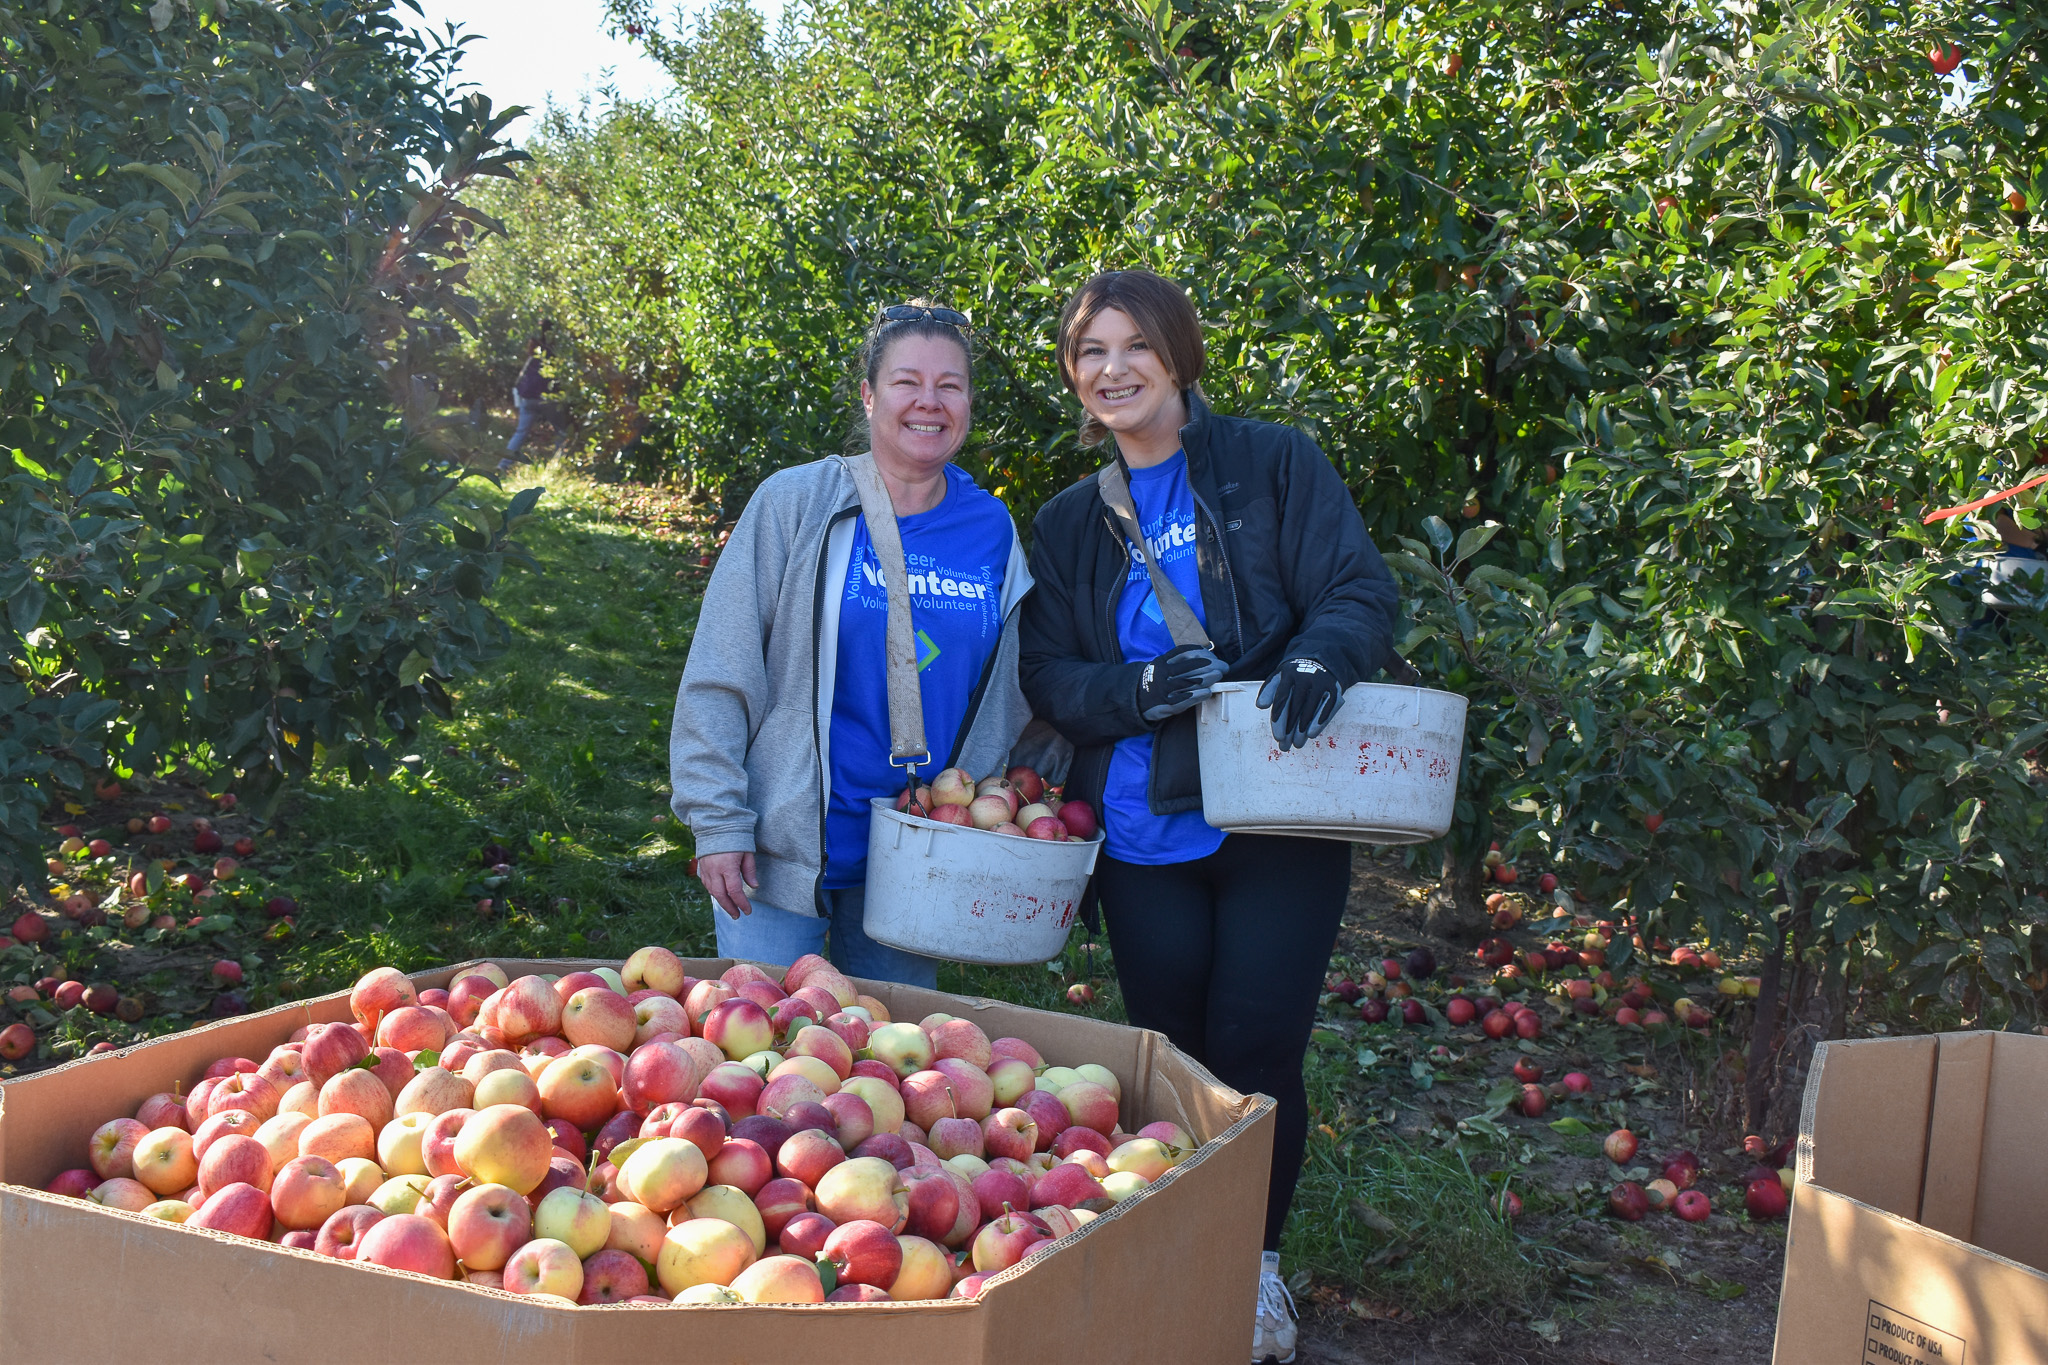 Volunteers smiling while standing in an apple orchard by a tote filled with apples